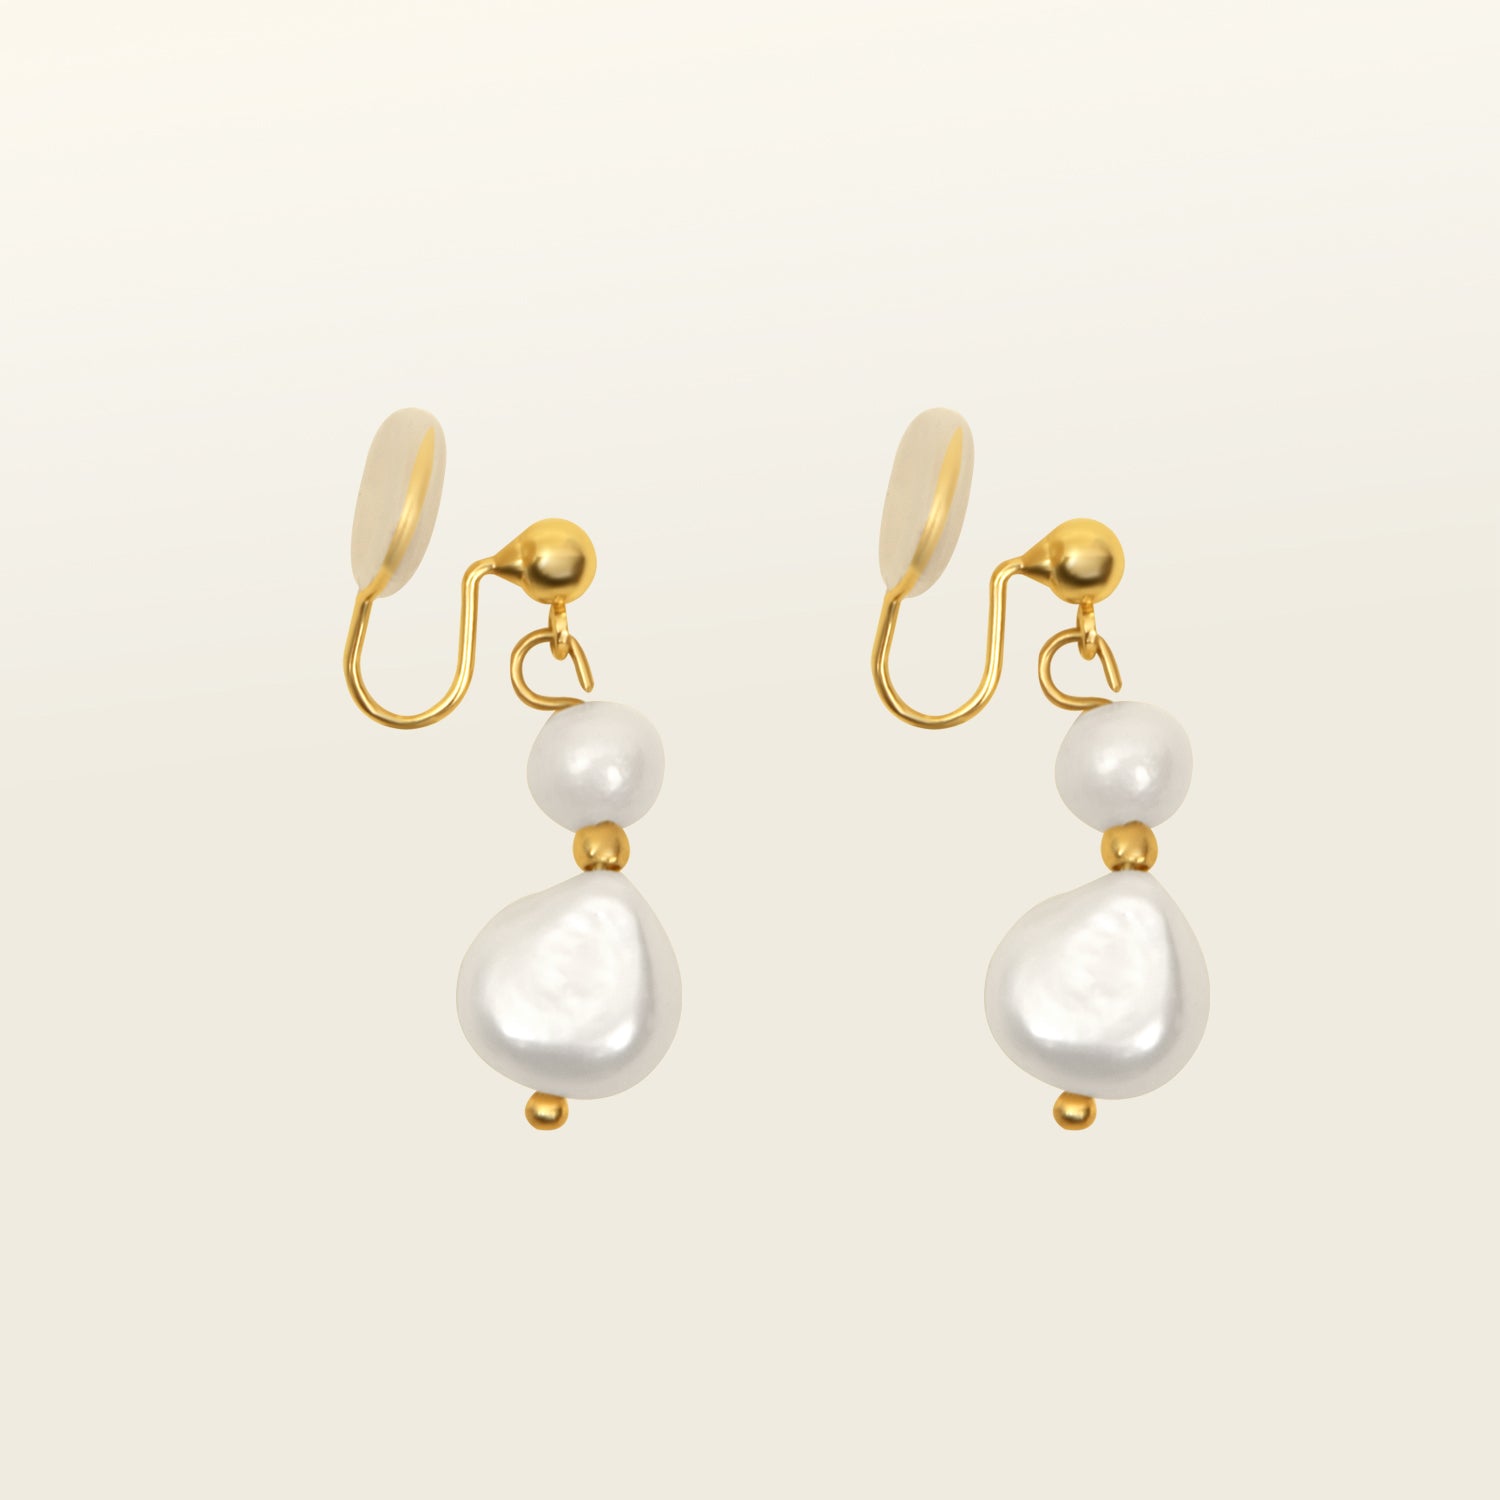 Image of the Duo Pearl Clip-On Earrings in Gold feature a mosquito coil clip-on closure ideal for all ear types. Enjoy medium secure hold and comfortable wear for up to 24 hours - gently squeezing the padding forward once on the ear for adjustable fit. Crafted with freshwater pearls and 18K gold plated stainless steel, each piece features unique natural variations in size and colour.